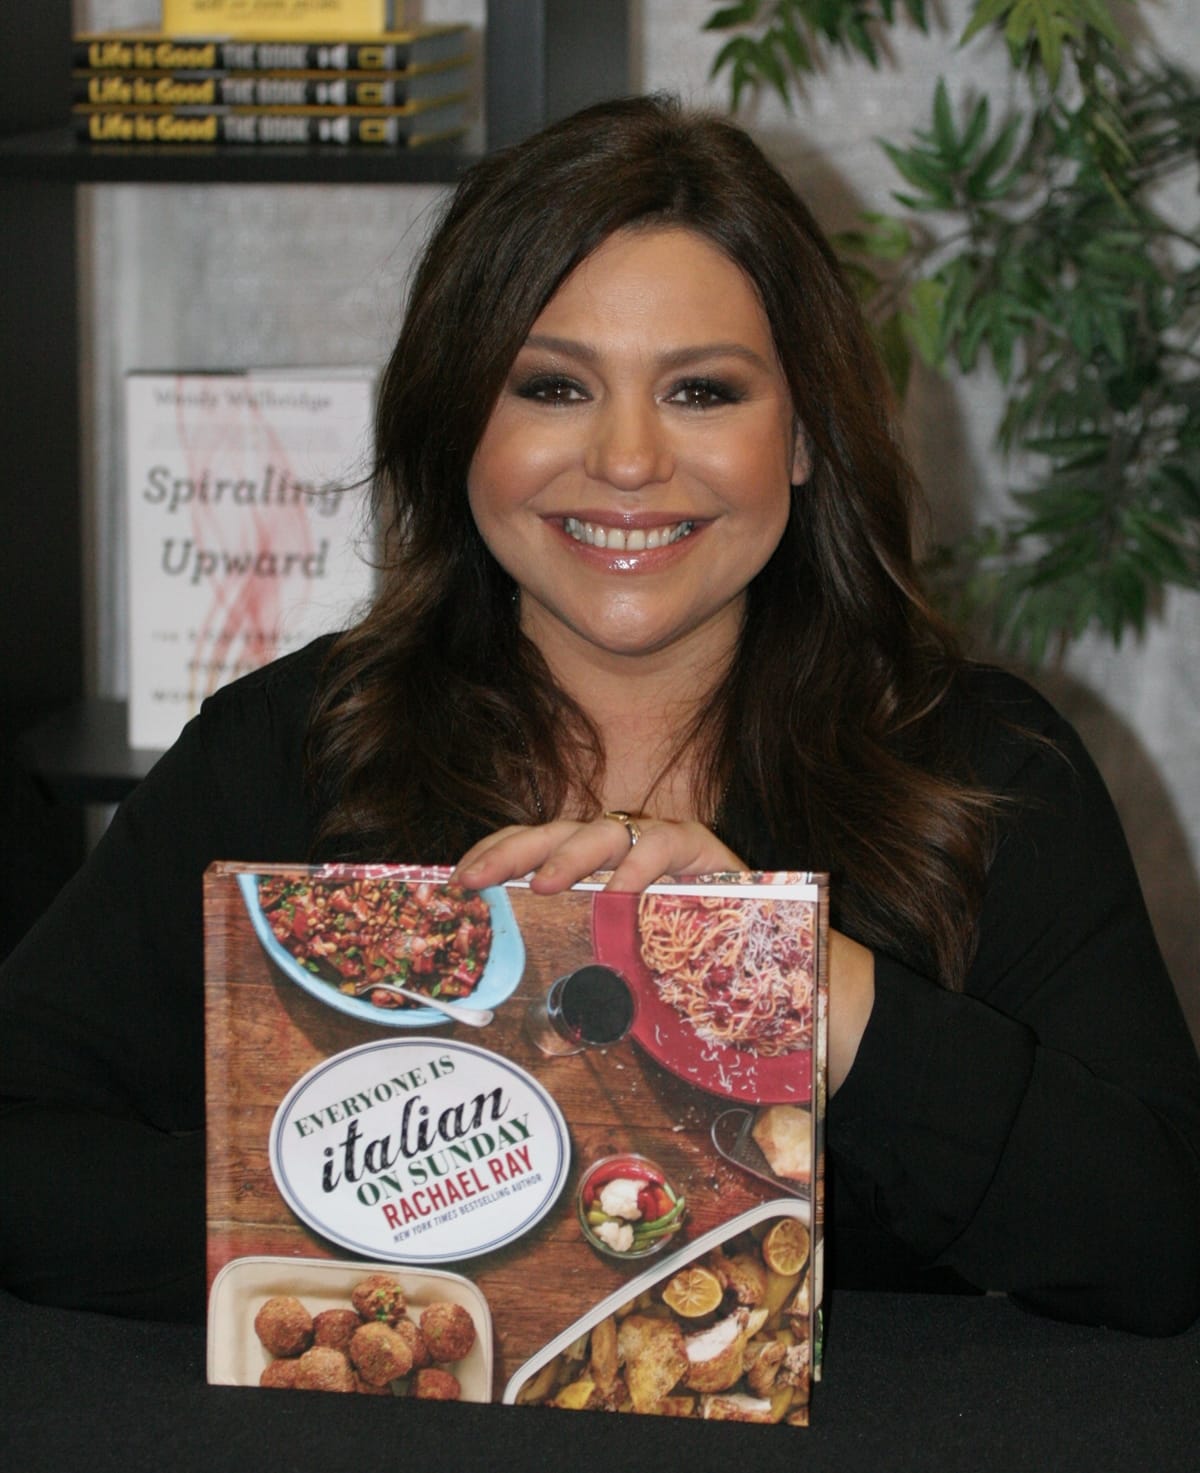 Wealthy celebrity chef Rachael Ray poses with her book, 'Everyone is Italian on Sunday' during Pennsylvania Conference For Women